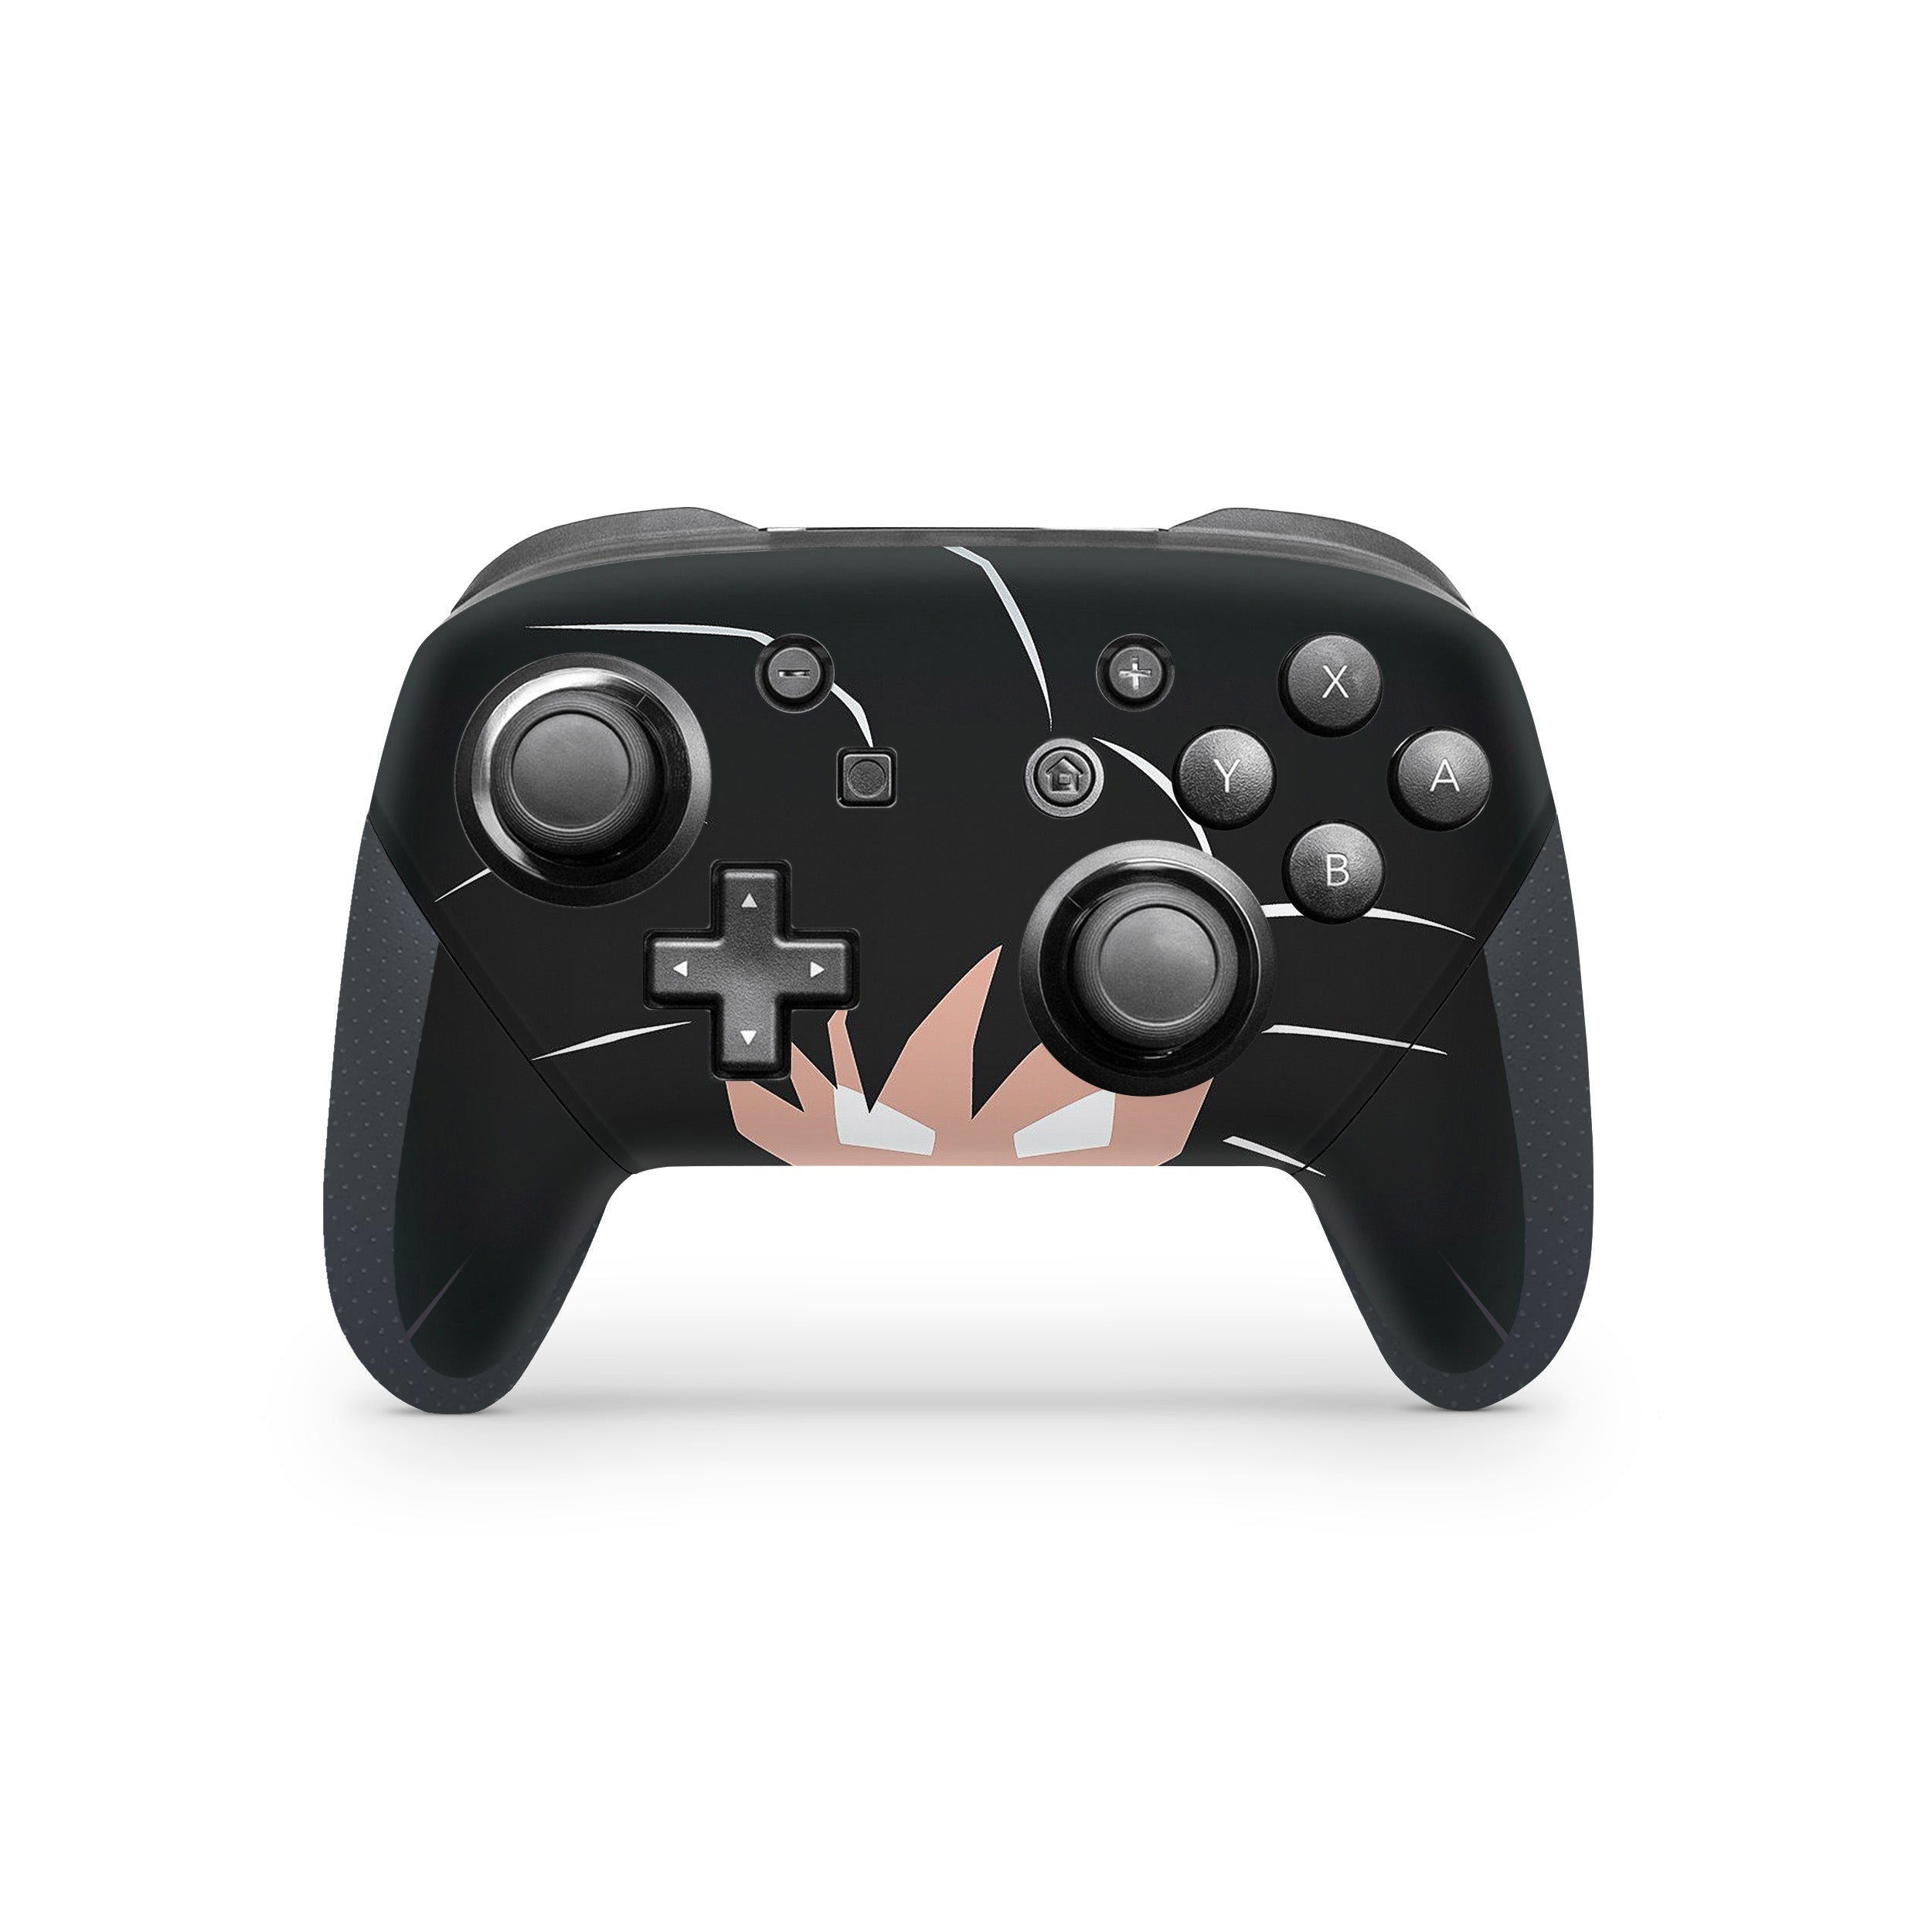 A video game skin featuring a Dragon Ball Z Black Goku design for the Switch Pro Controller.